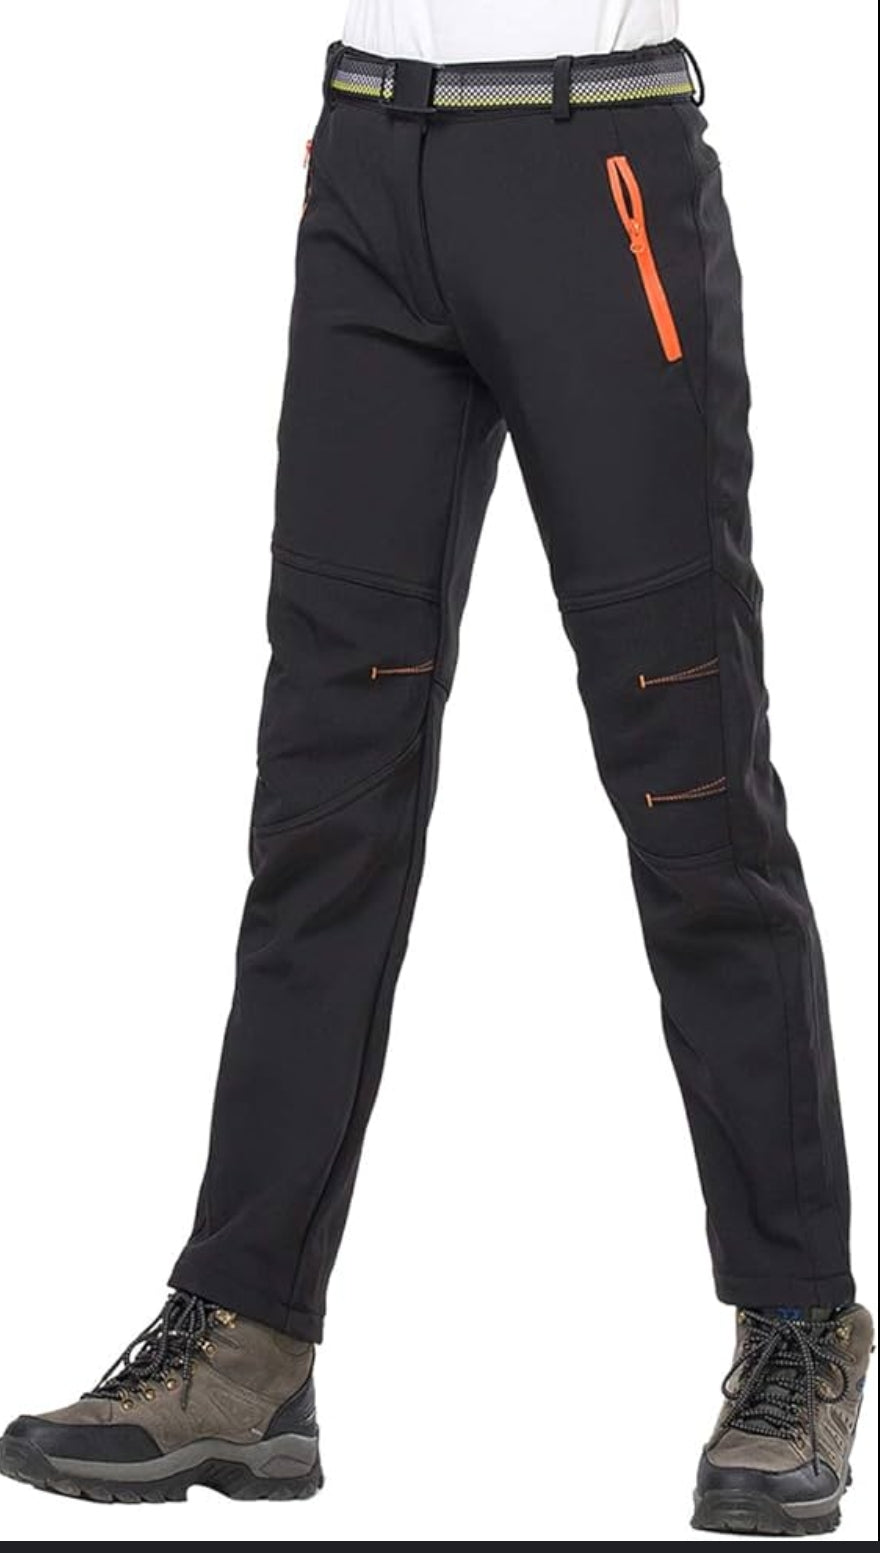 Black Sportive Men's Relaxed Fit Athletic Trousers